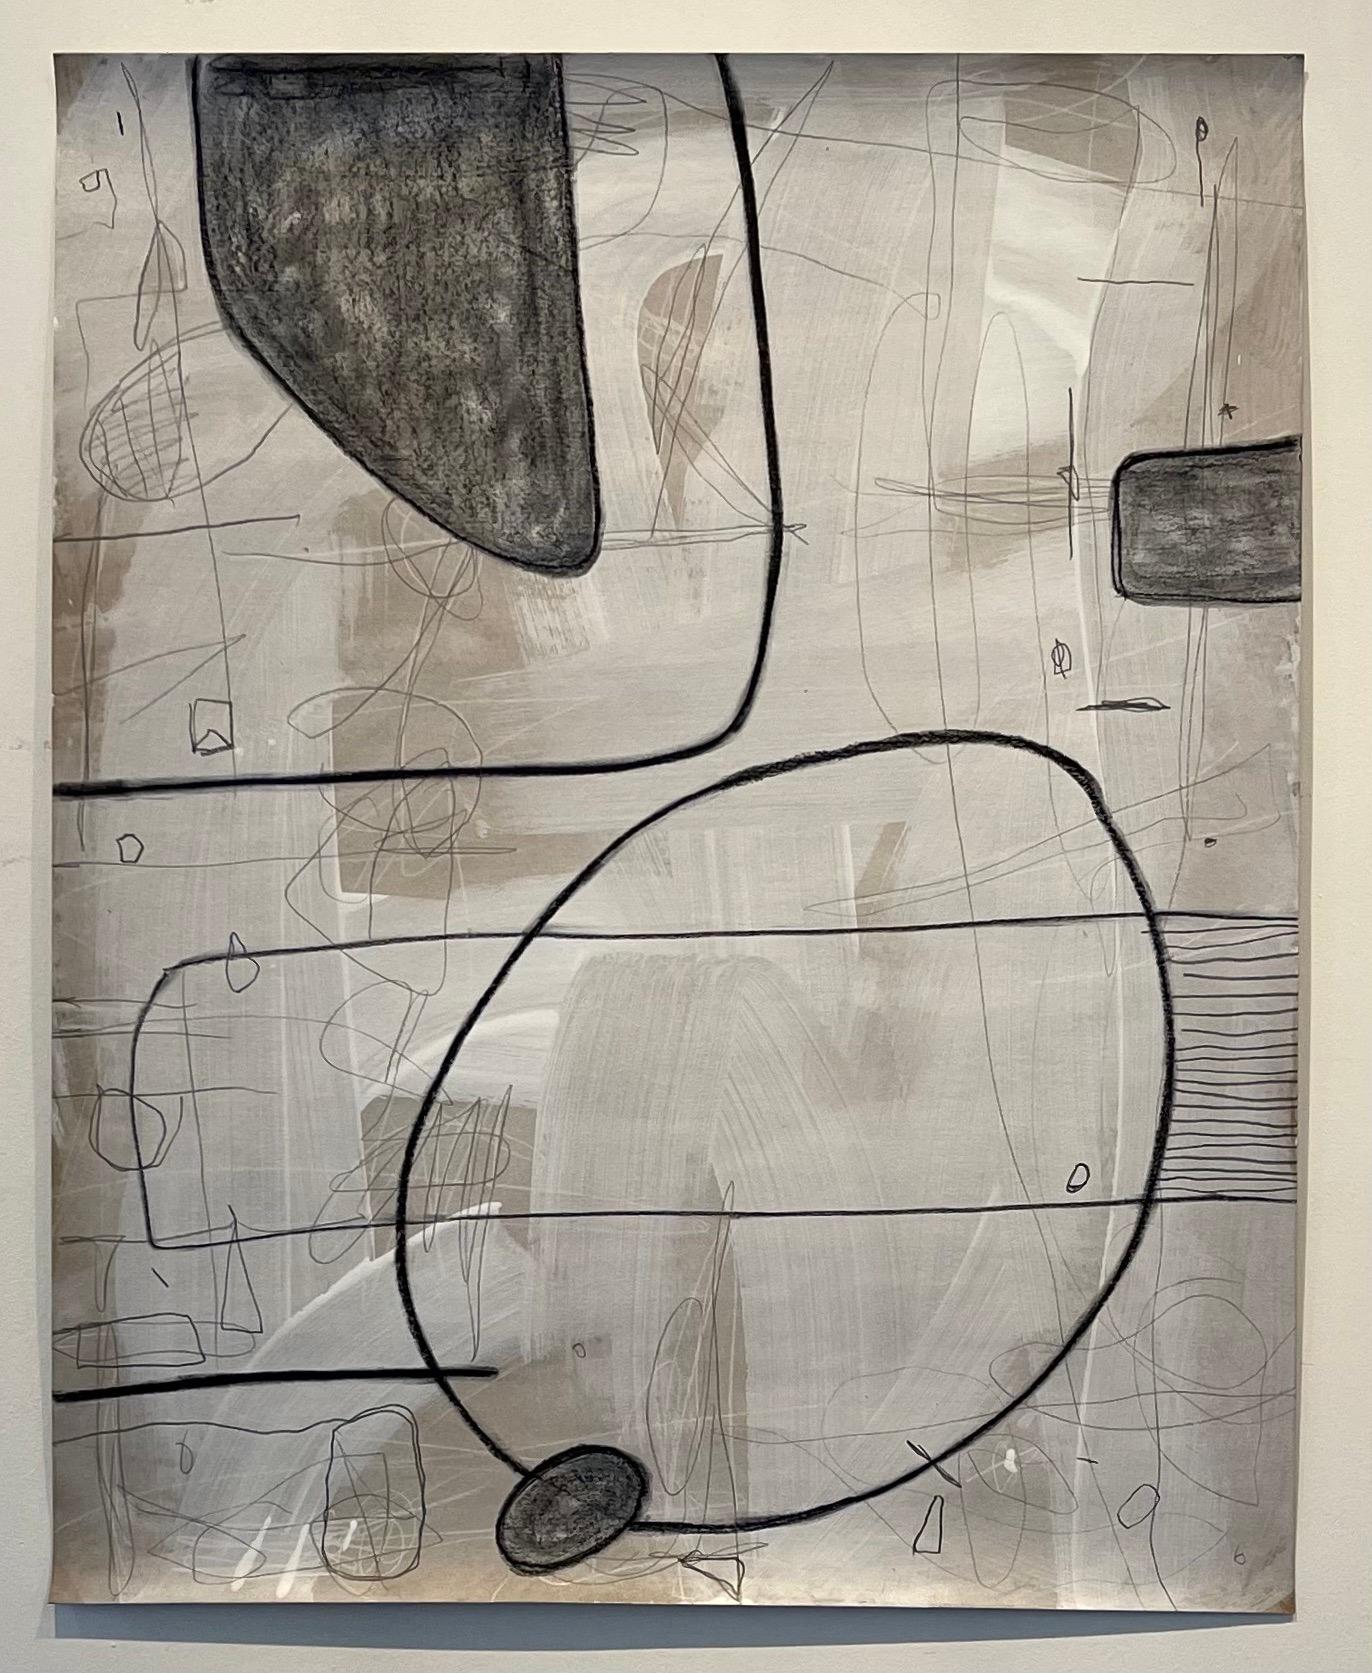 Untitled #409 by Murray Duncan
Mix media on paper, 2024
Unframed.
The size is 32